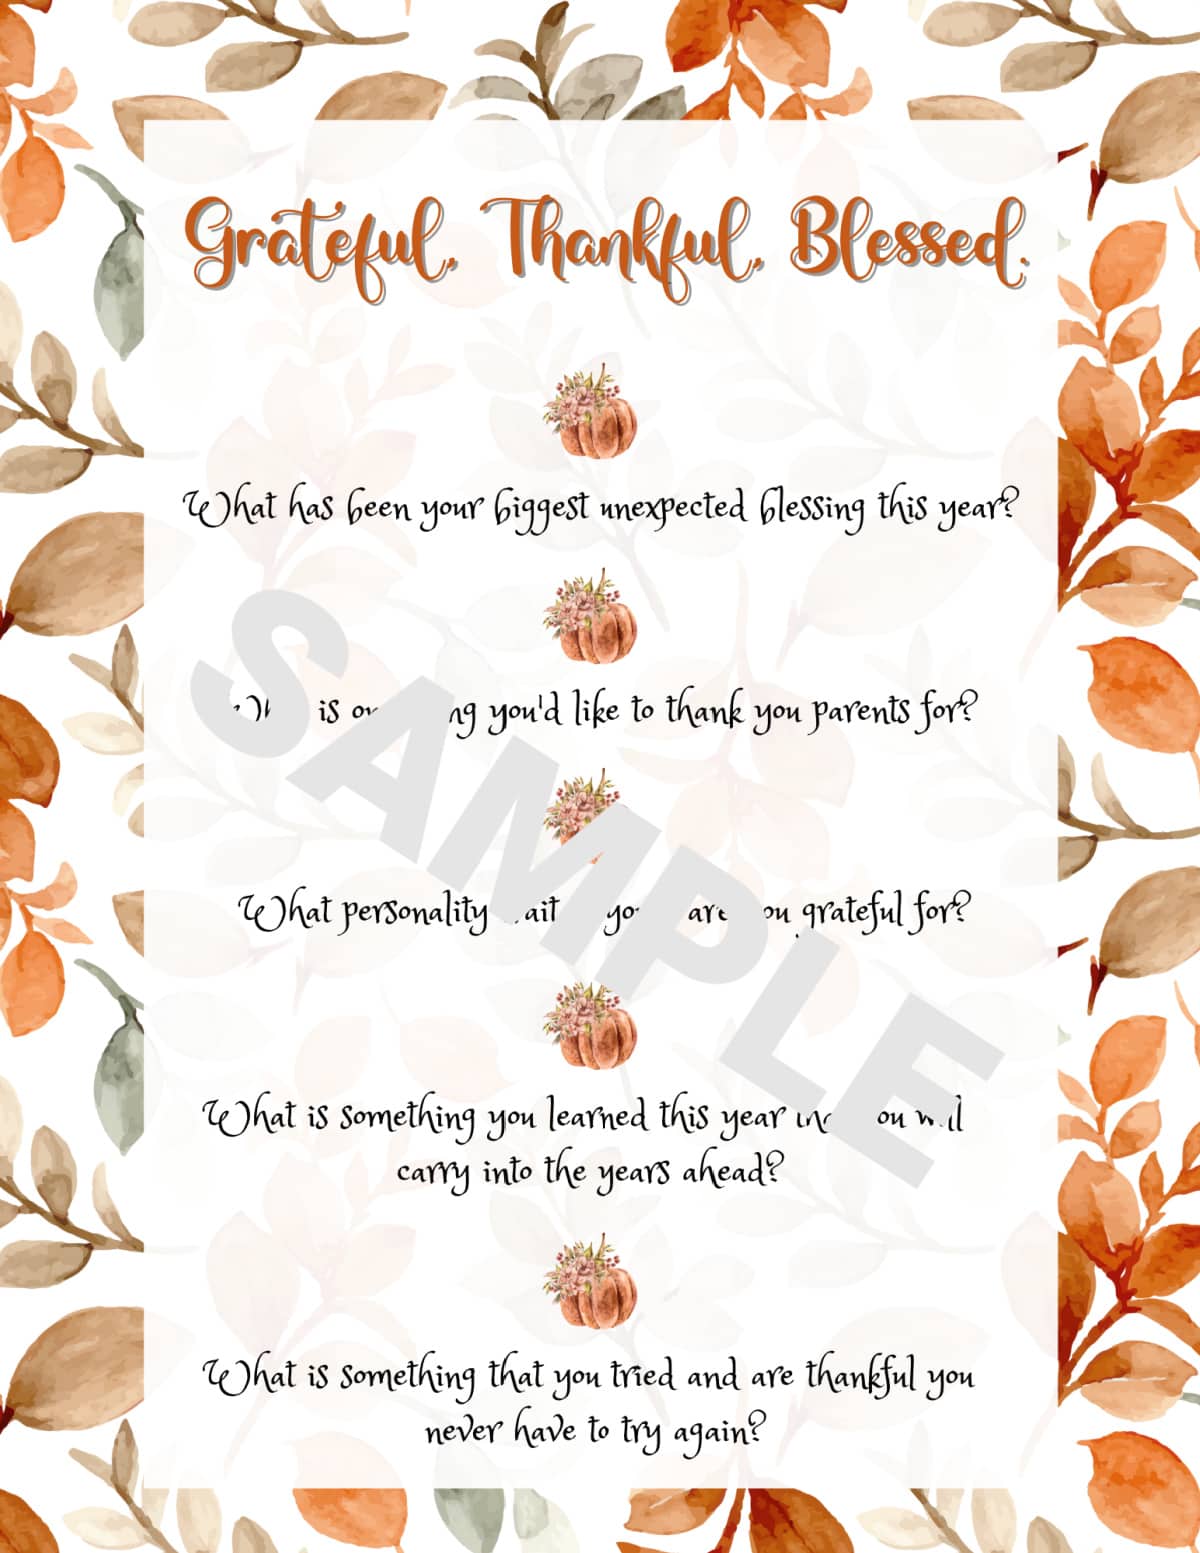 graphic image of conversation starter questions for Thanksgiving